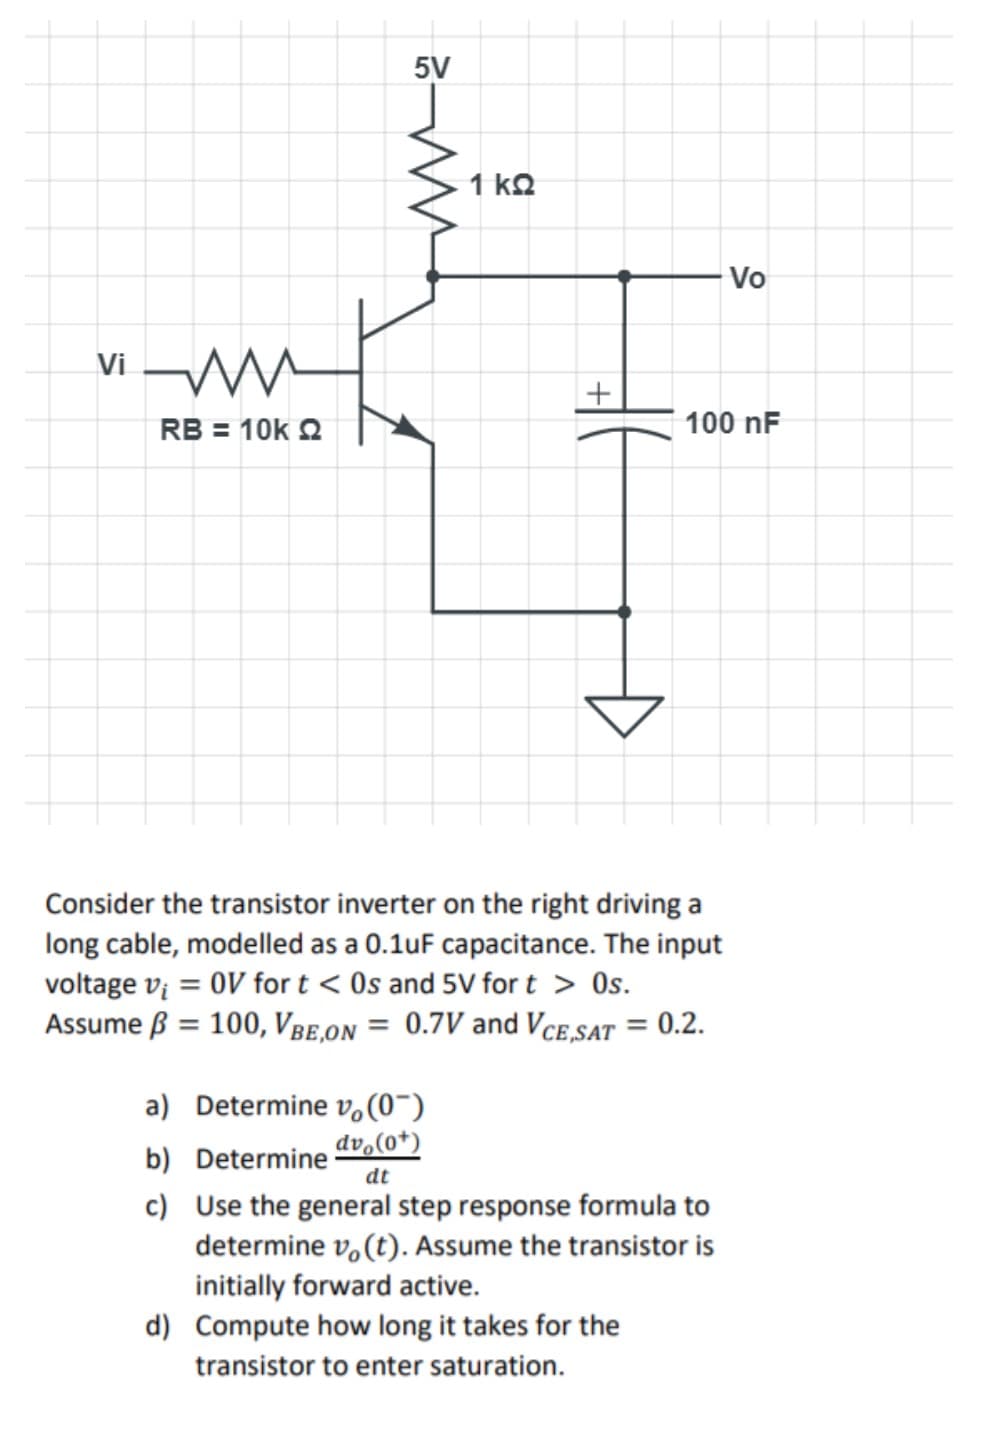 5V
1 kQ
Vo
Vi W
RB = 10k 2
100 nF
Consider the transistor inverter on the right driving a
long cable, modelled as a 0.1uF capacitance. The input
voltage vį = 0V for t < Os and 5V for t > Os.
Assume ß = 100, Vbe,on = 0.7V and Vce sat = 0.2.
a) Determine v.(0~)
dv,(0*)
b) Determine
dt
c) Use the general step response formula to
determine v,(t). Assume the transistor is
initially forward active.
d) Compute how long it takes for the
transistor to enter saturation.
